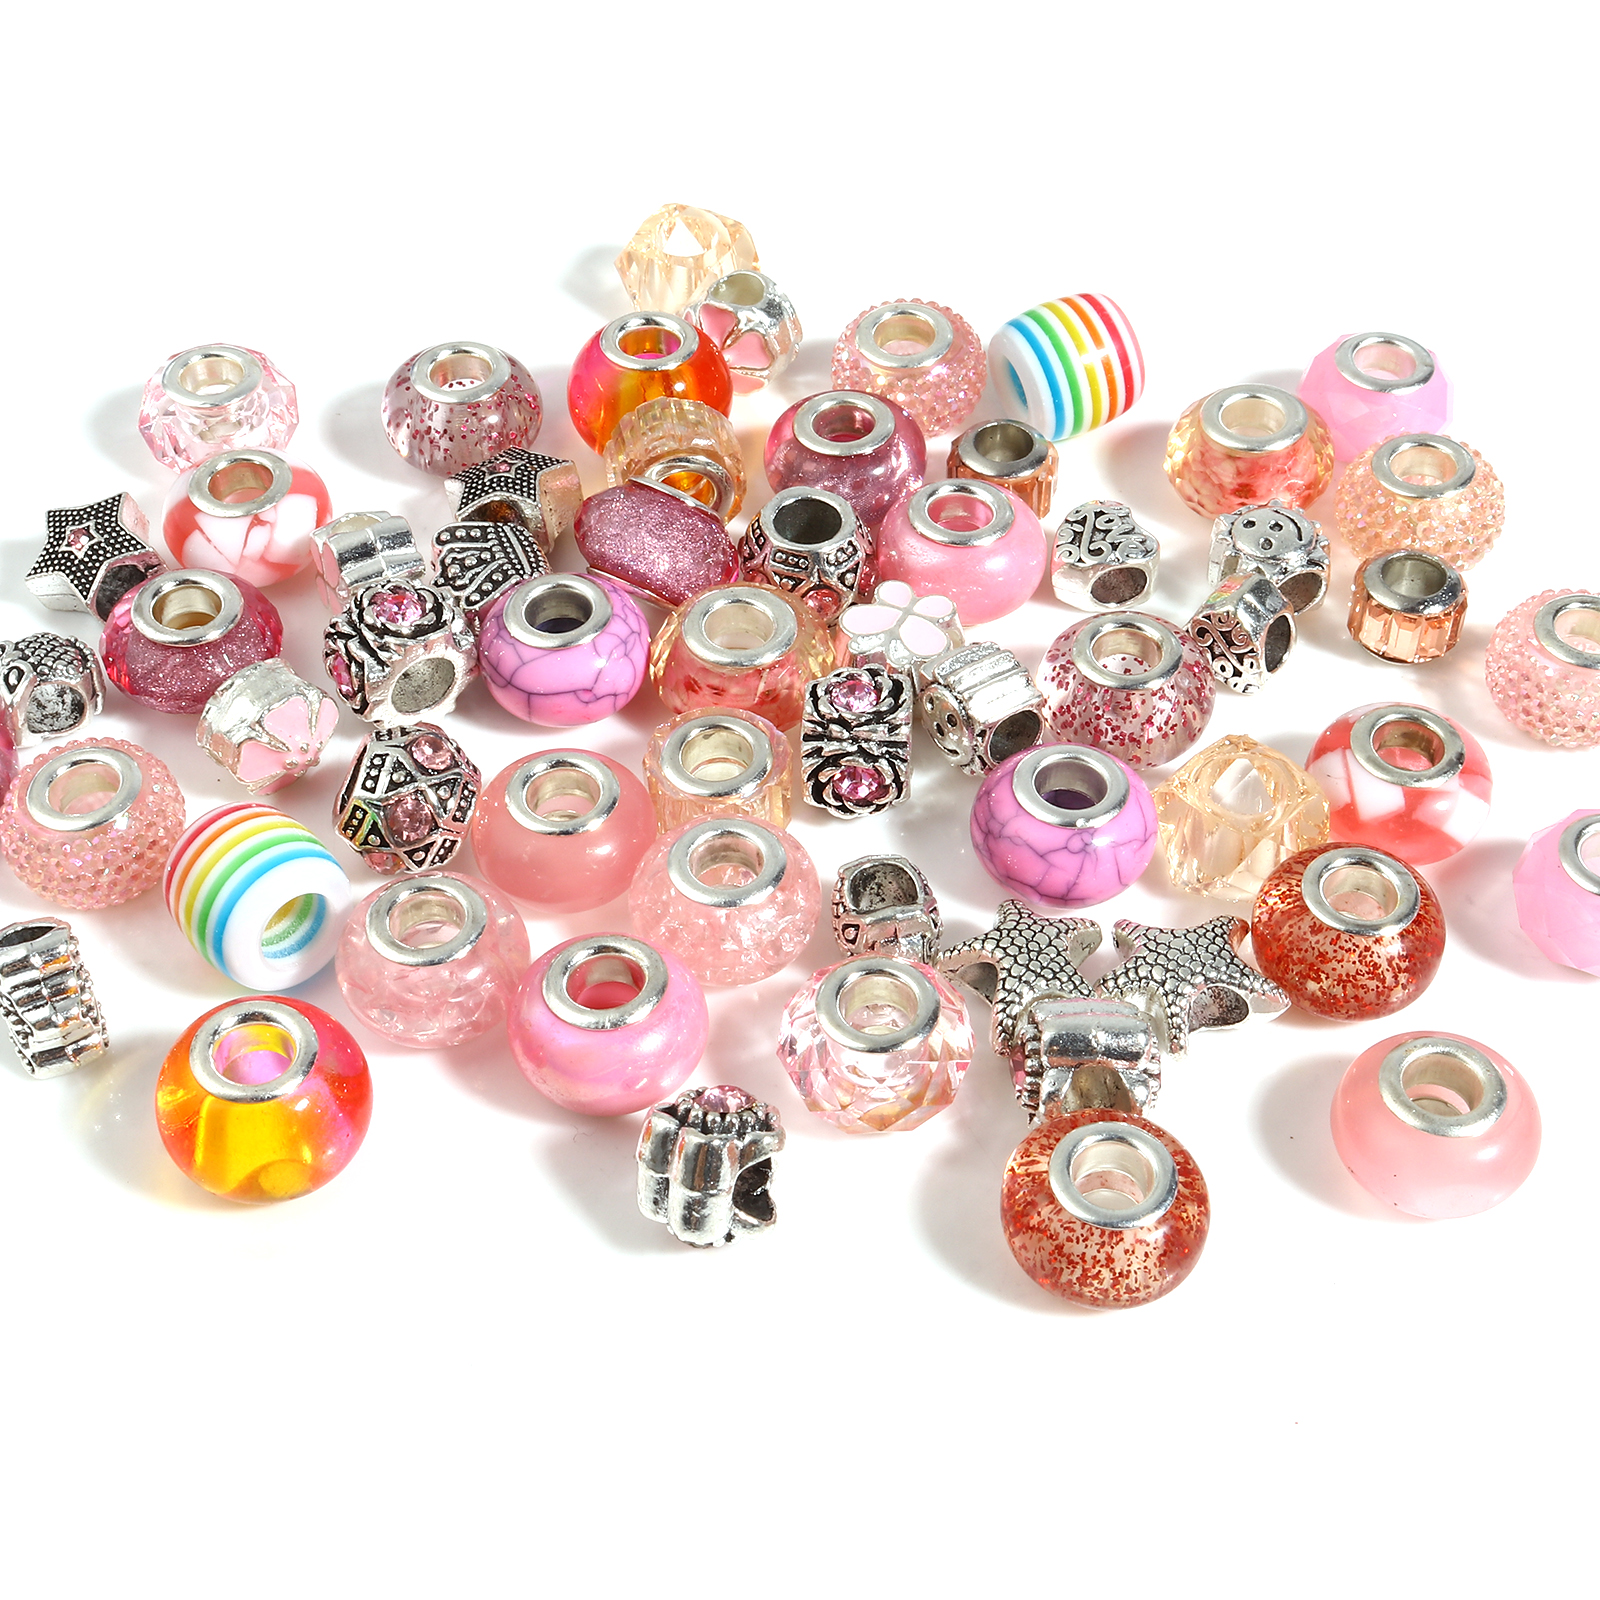 Picture of Zinc Based Alloy & Acrylic Large Hole Charm Beads Silver Tone Pink Round At Random 14mm Dia., 9mm x 8mm, Hole: Approx 5.1mm - 4.5mm, 1 Set(60 Pcs/Set)